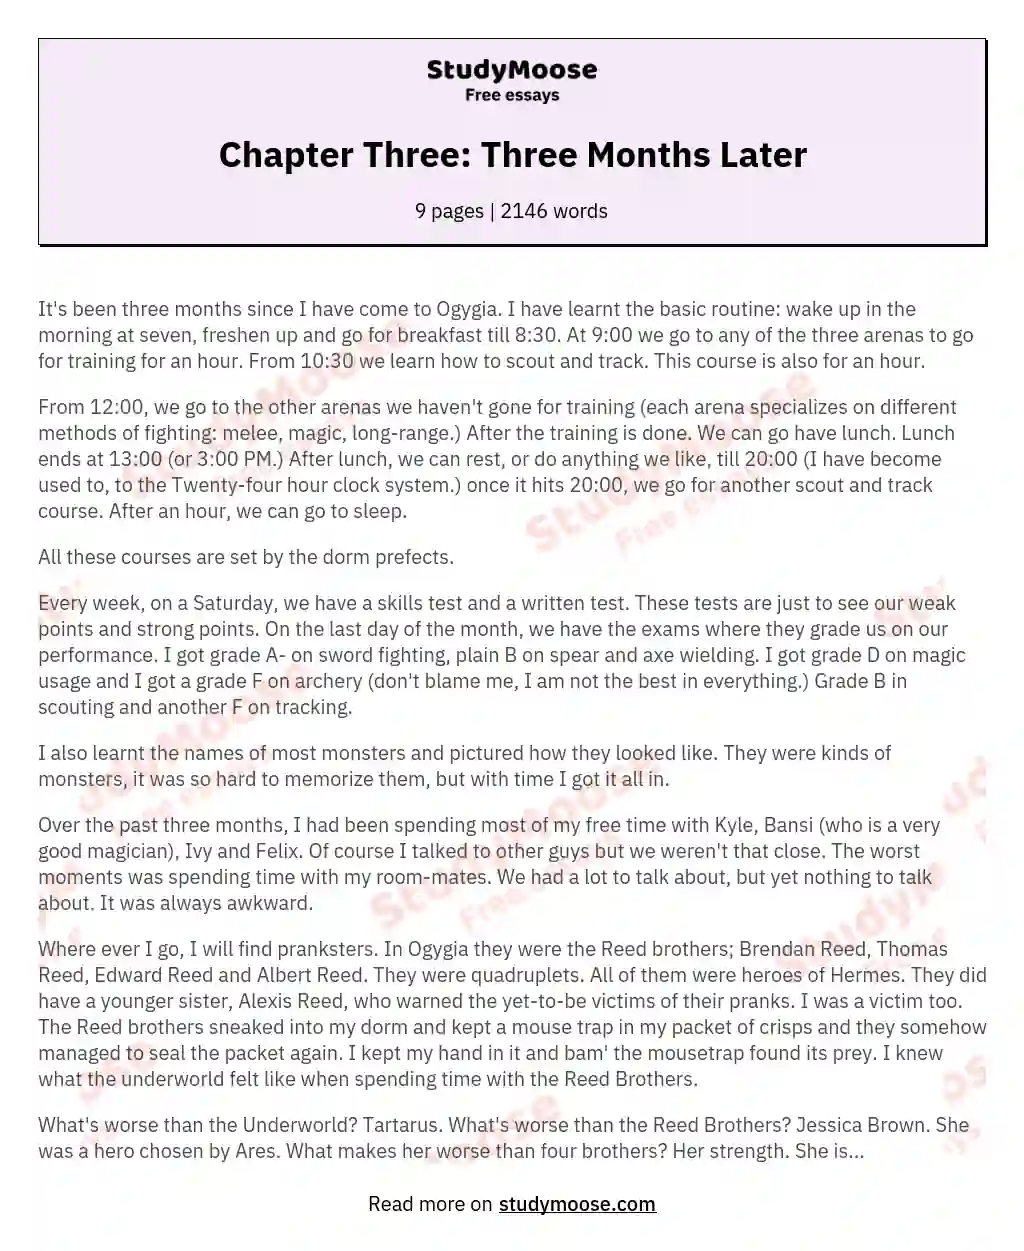 Chapter Three: Three Months Later